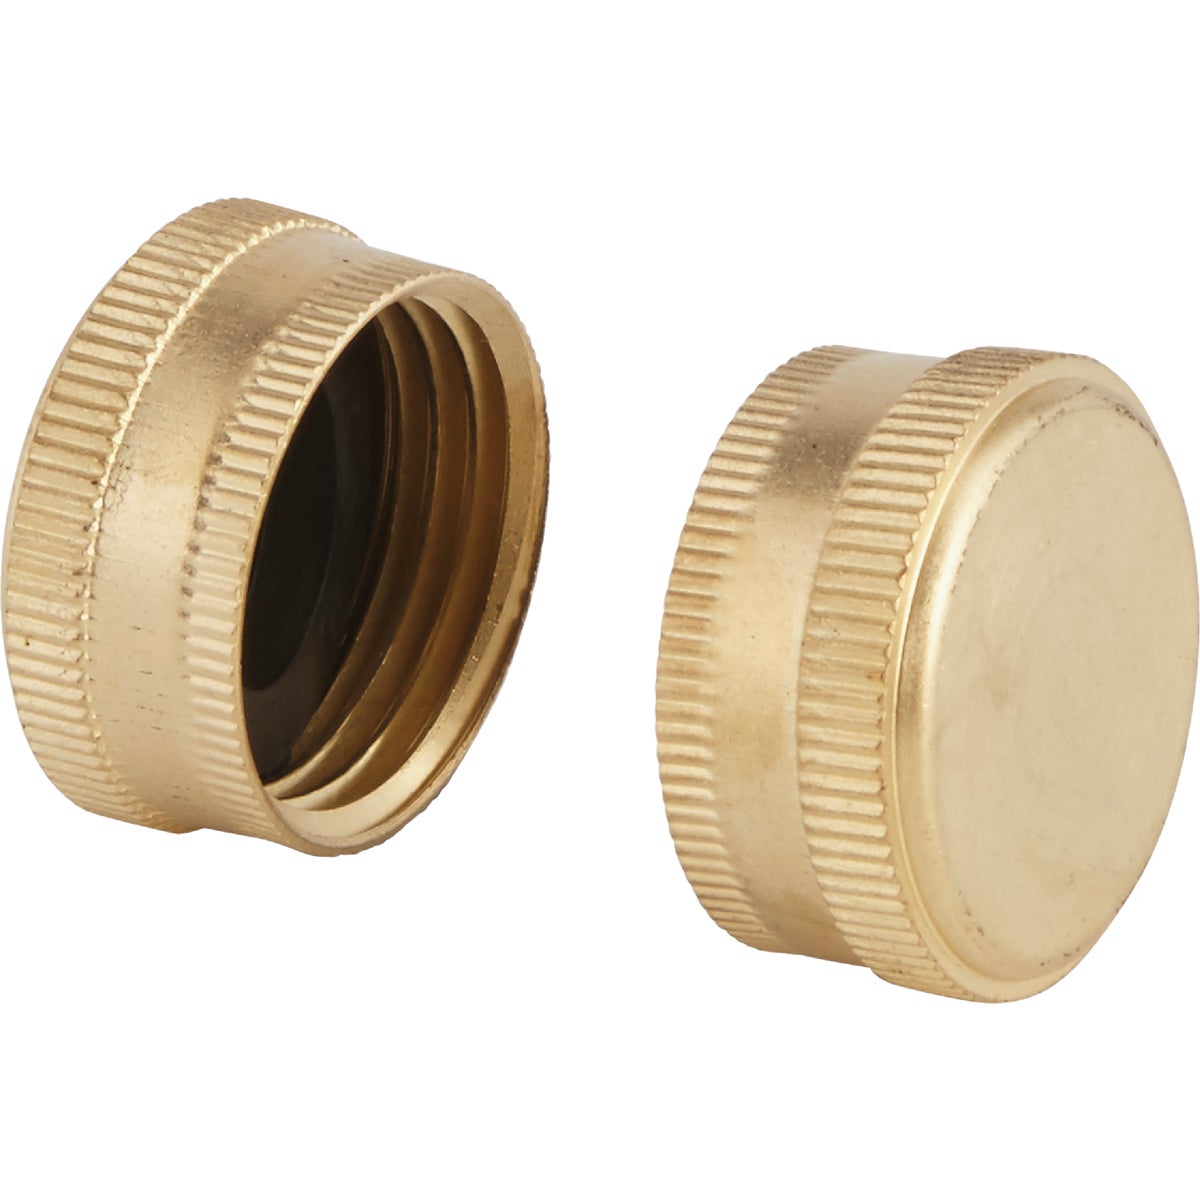 Item 723159, For use with any standard male hose end (5/8 In.). Durable construction.